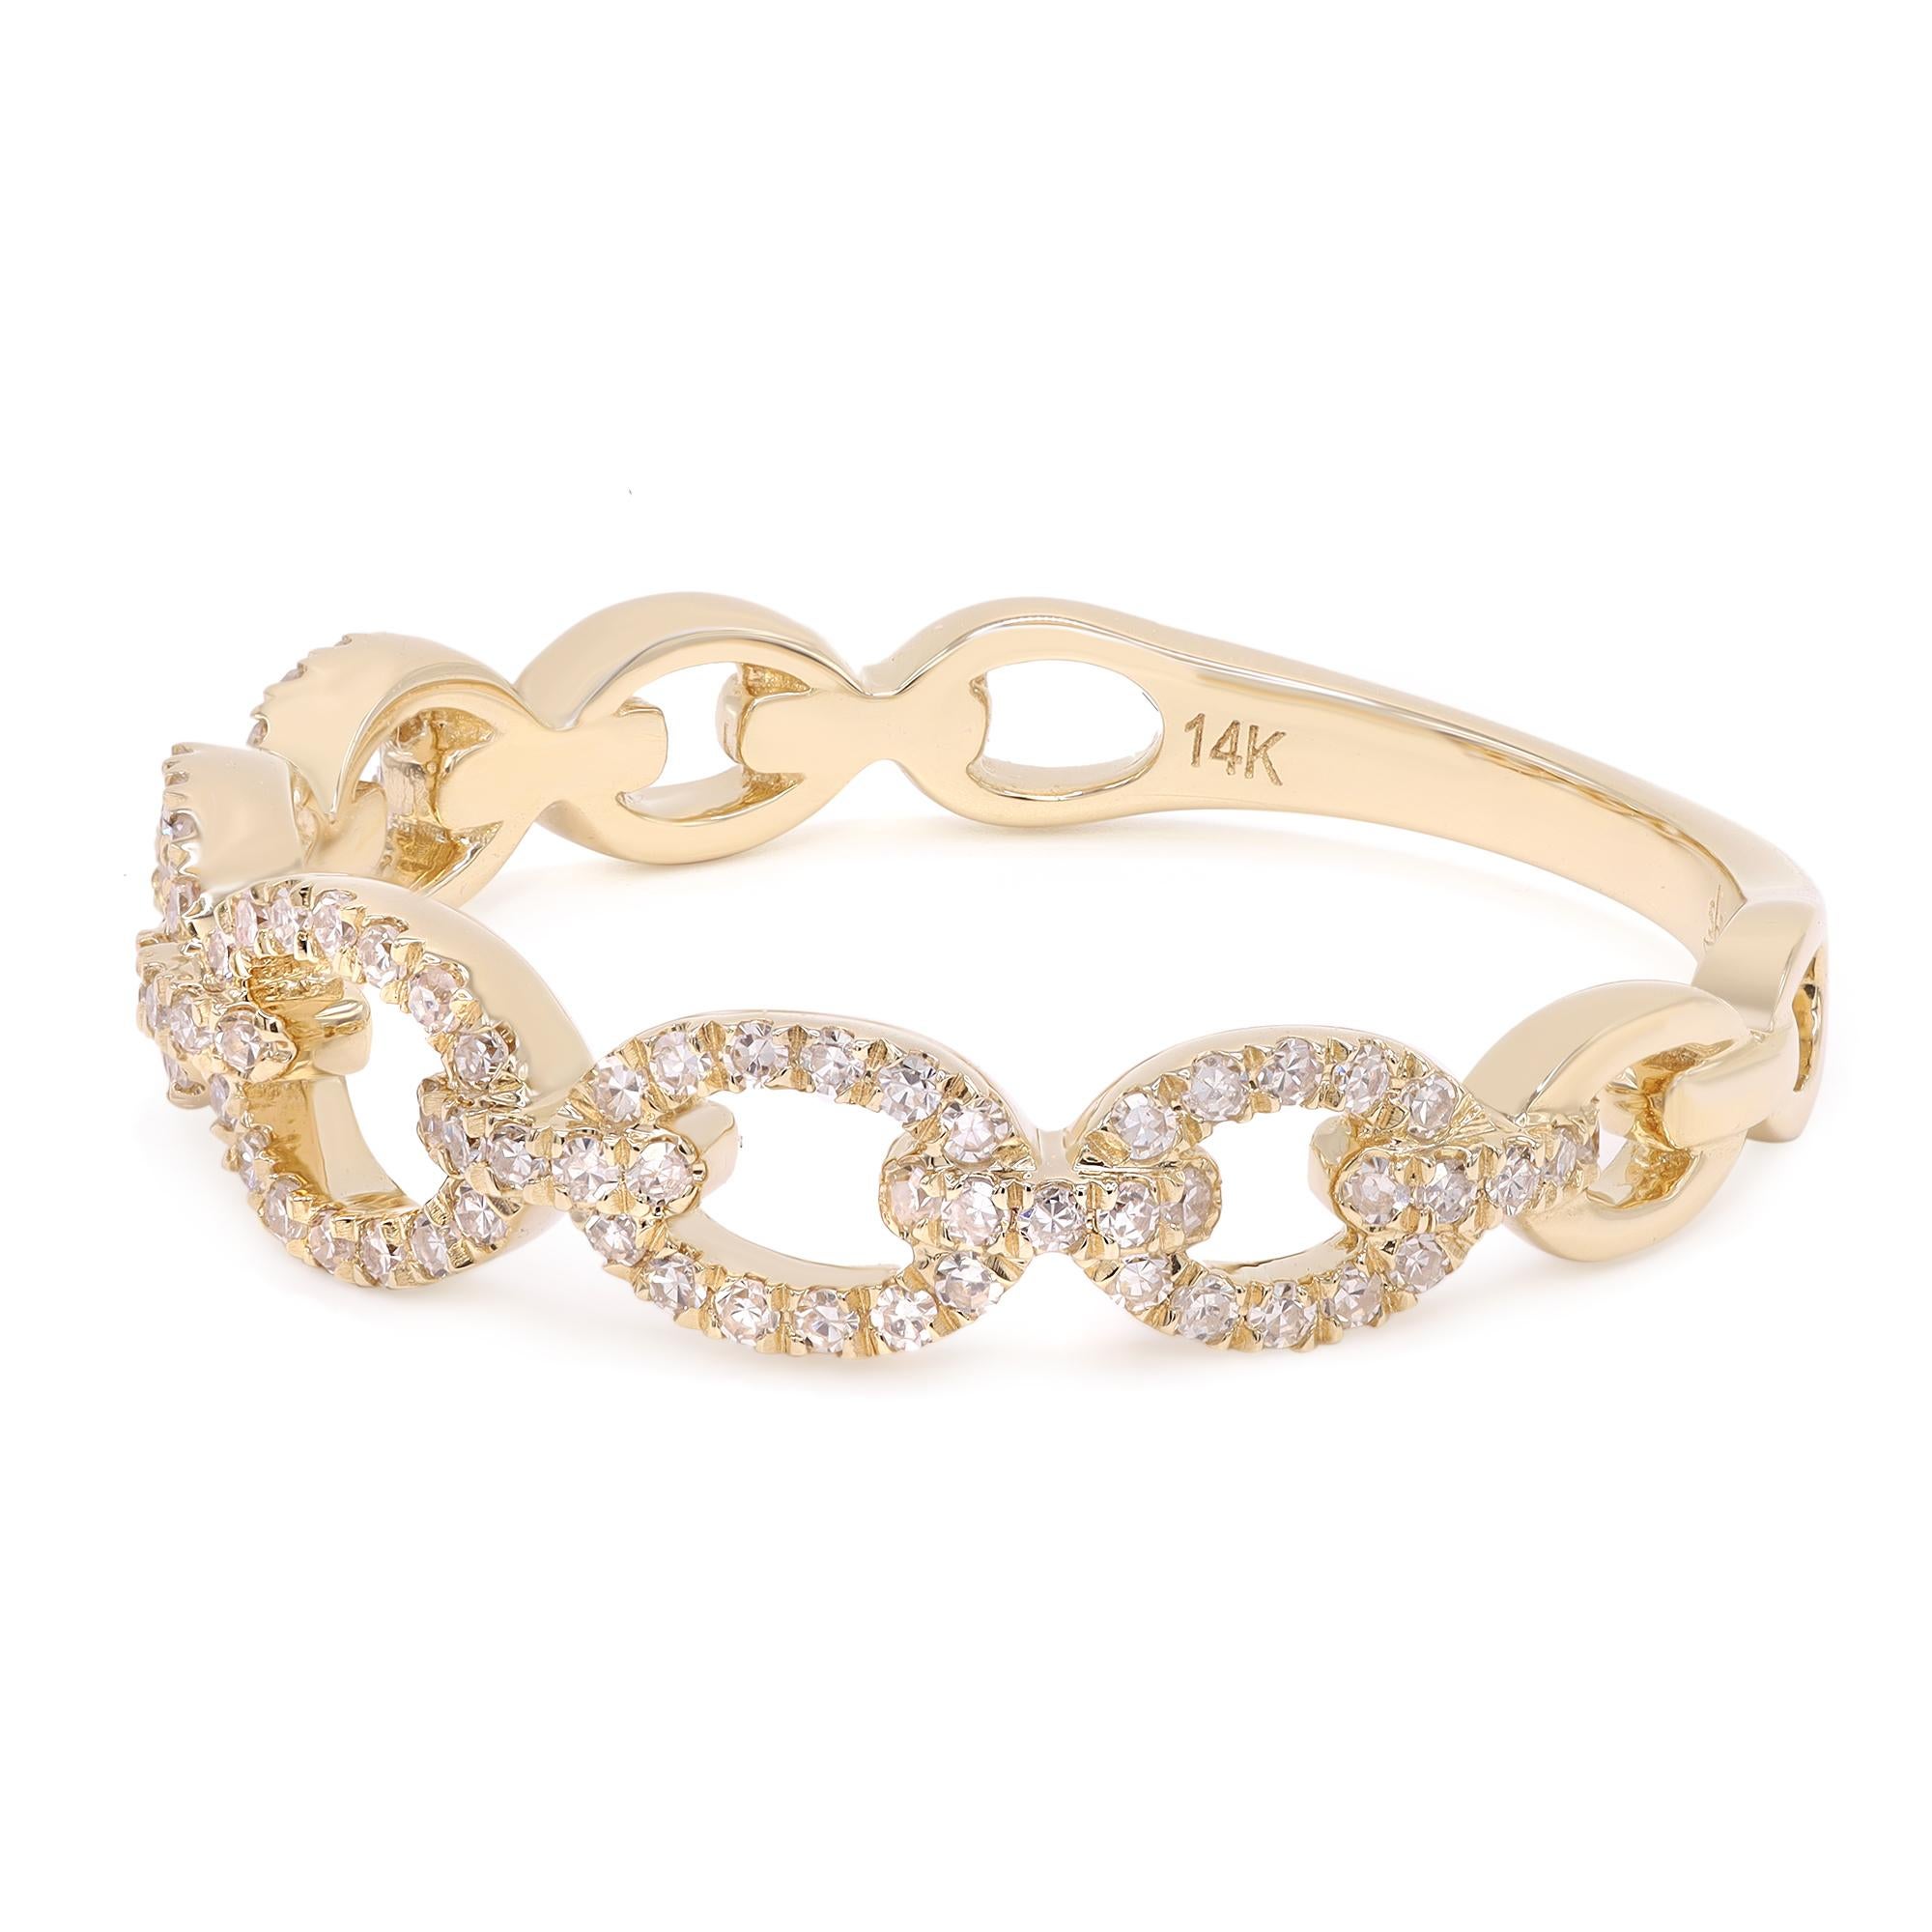 Simple and sophisticated, pave chain link diamond ring. Crafted in bright 14k yellow gold with pave-set round brilliant-cut diamonds in chain link design. This style is stackable and easy to mix and match. Total diamond weight: 0.23ct. Diamond color